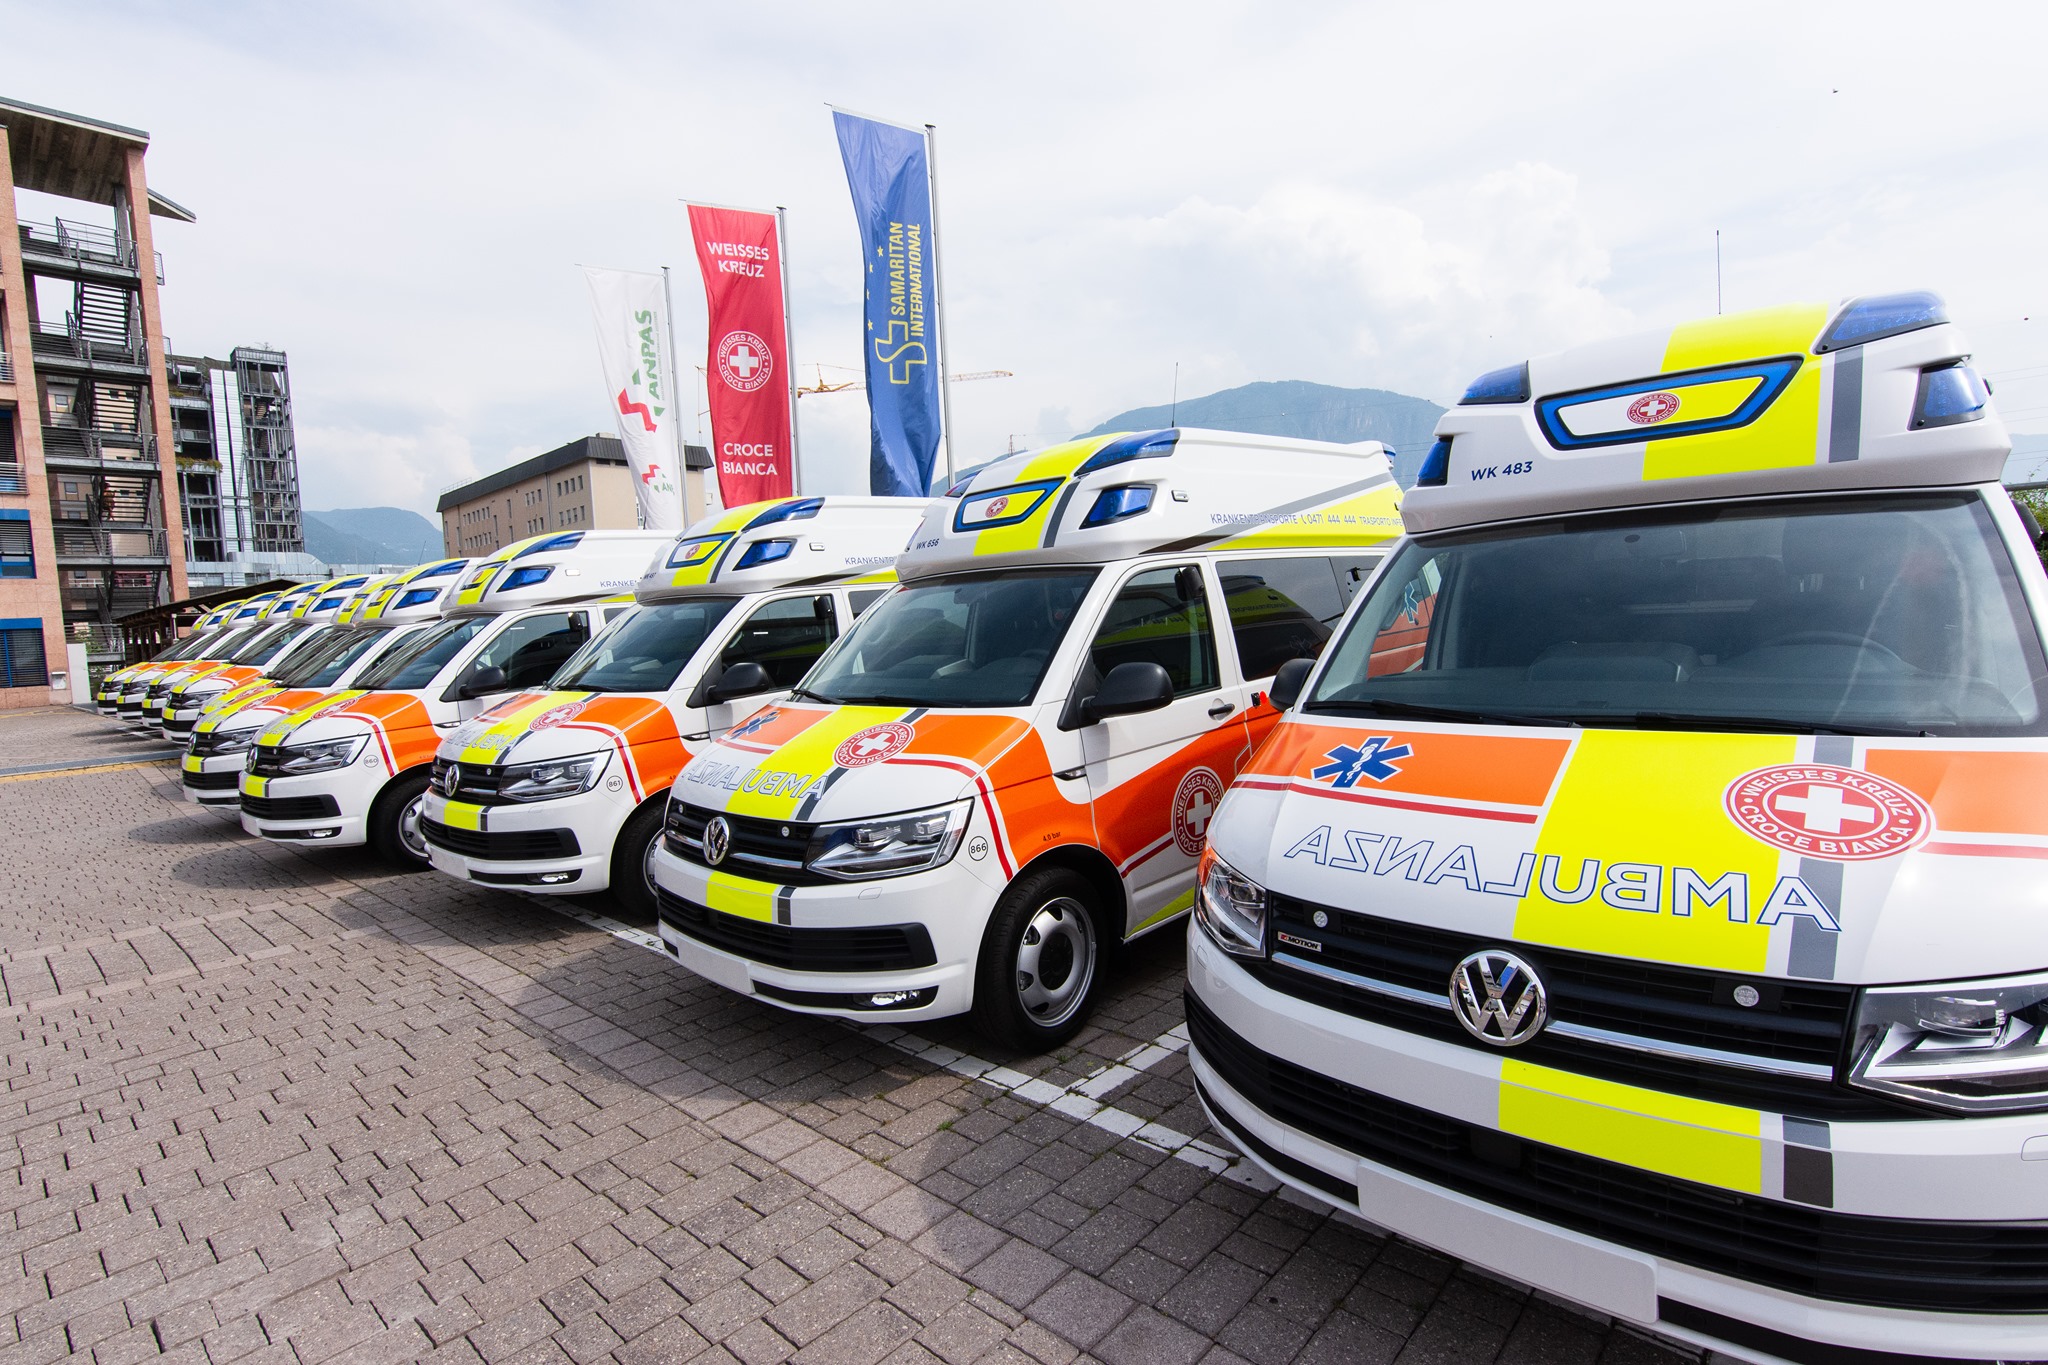 European Rules for Ambulance Driving Licences needed